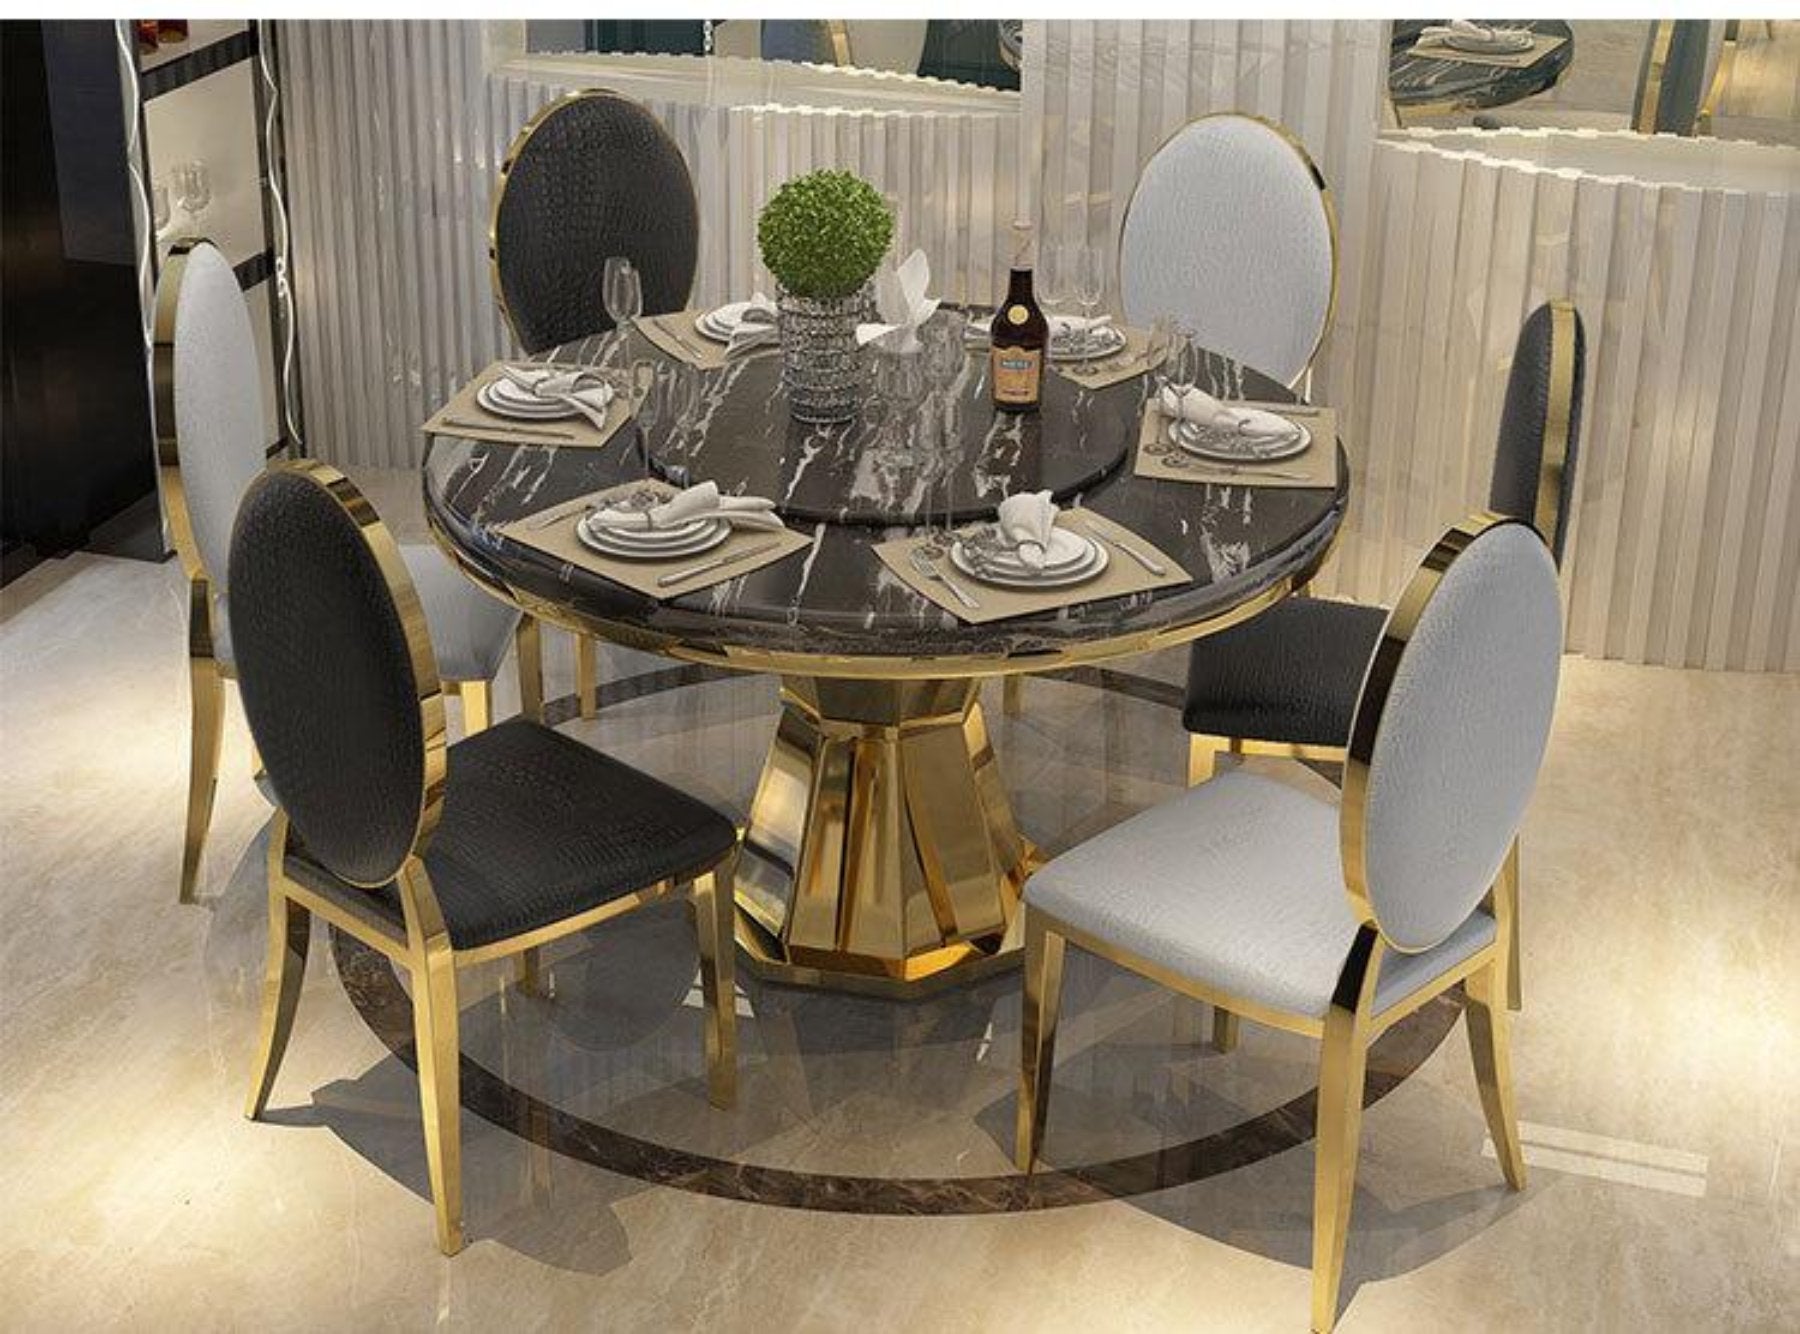 Stainless Steel Dining Room Set Home Furniture Minimalist Modern Glass Dining Table And 6 Chairs Mesa ?v=1554219506